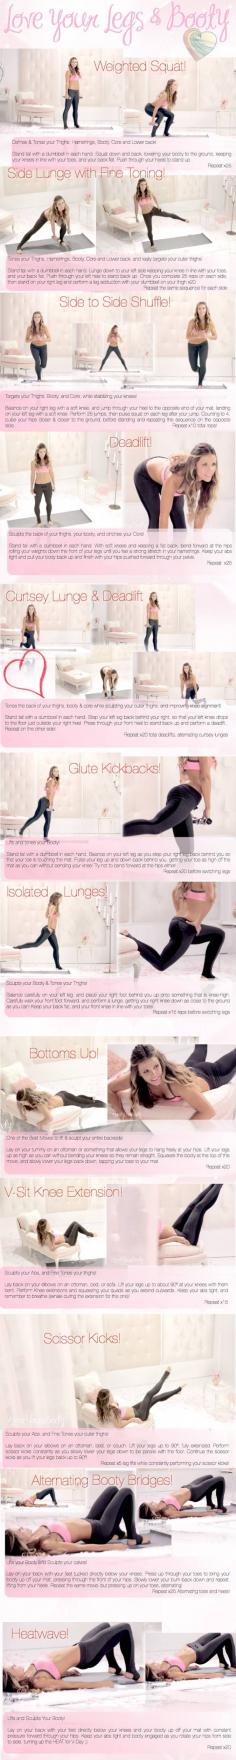 Love-Your-Body-Legs-Booty-Tone-it-up-best-workout